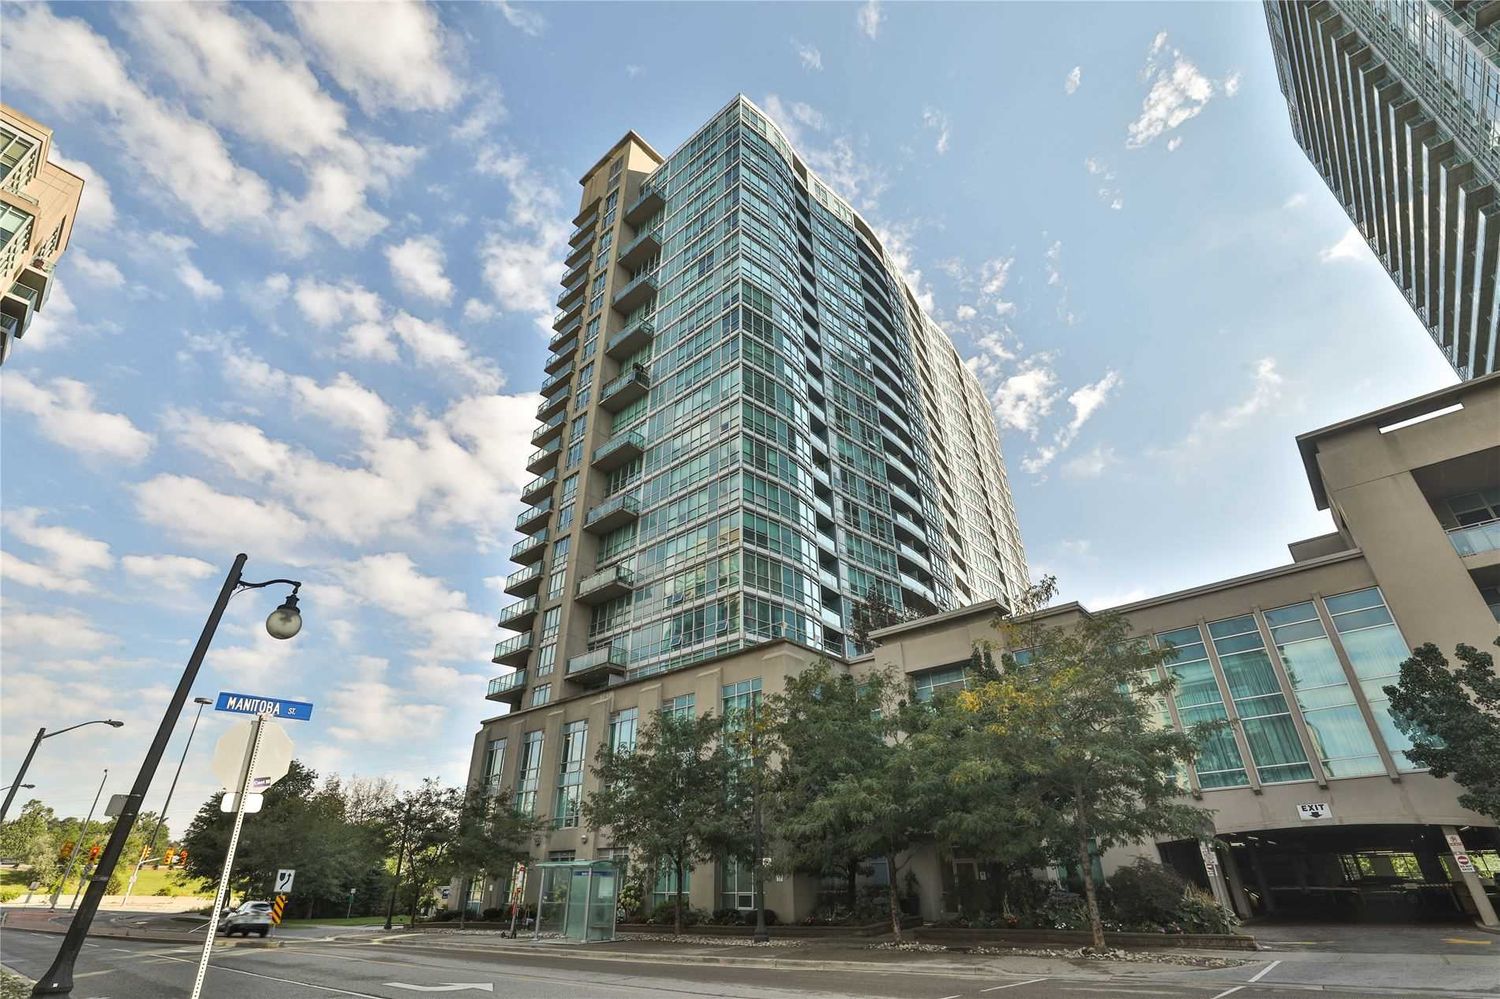 185 Legion Road N. The Tides at Mystic Pointe Condos is located in  Etobicoke, Toronto - image #1 of 2